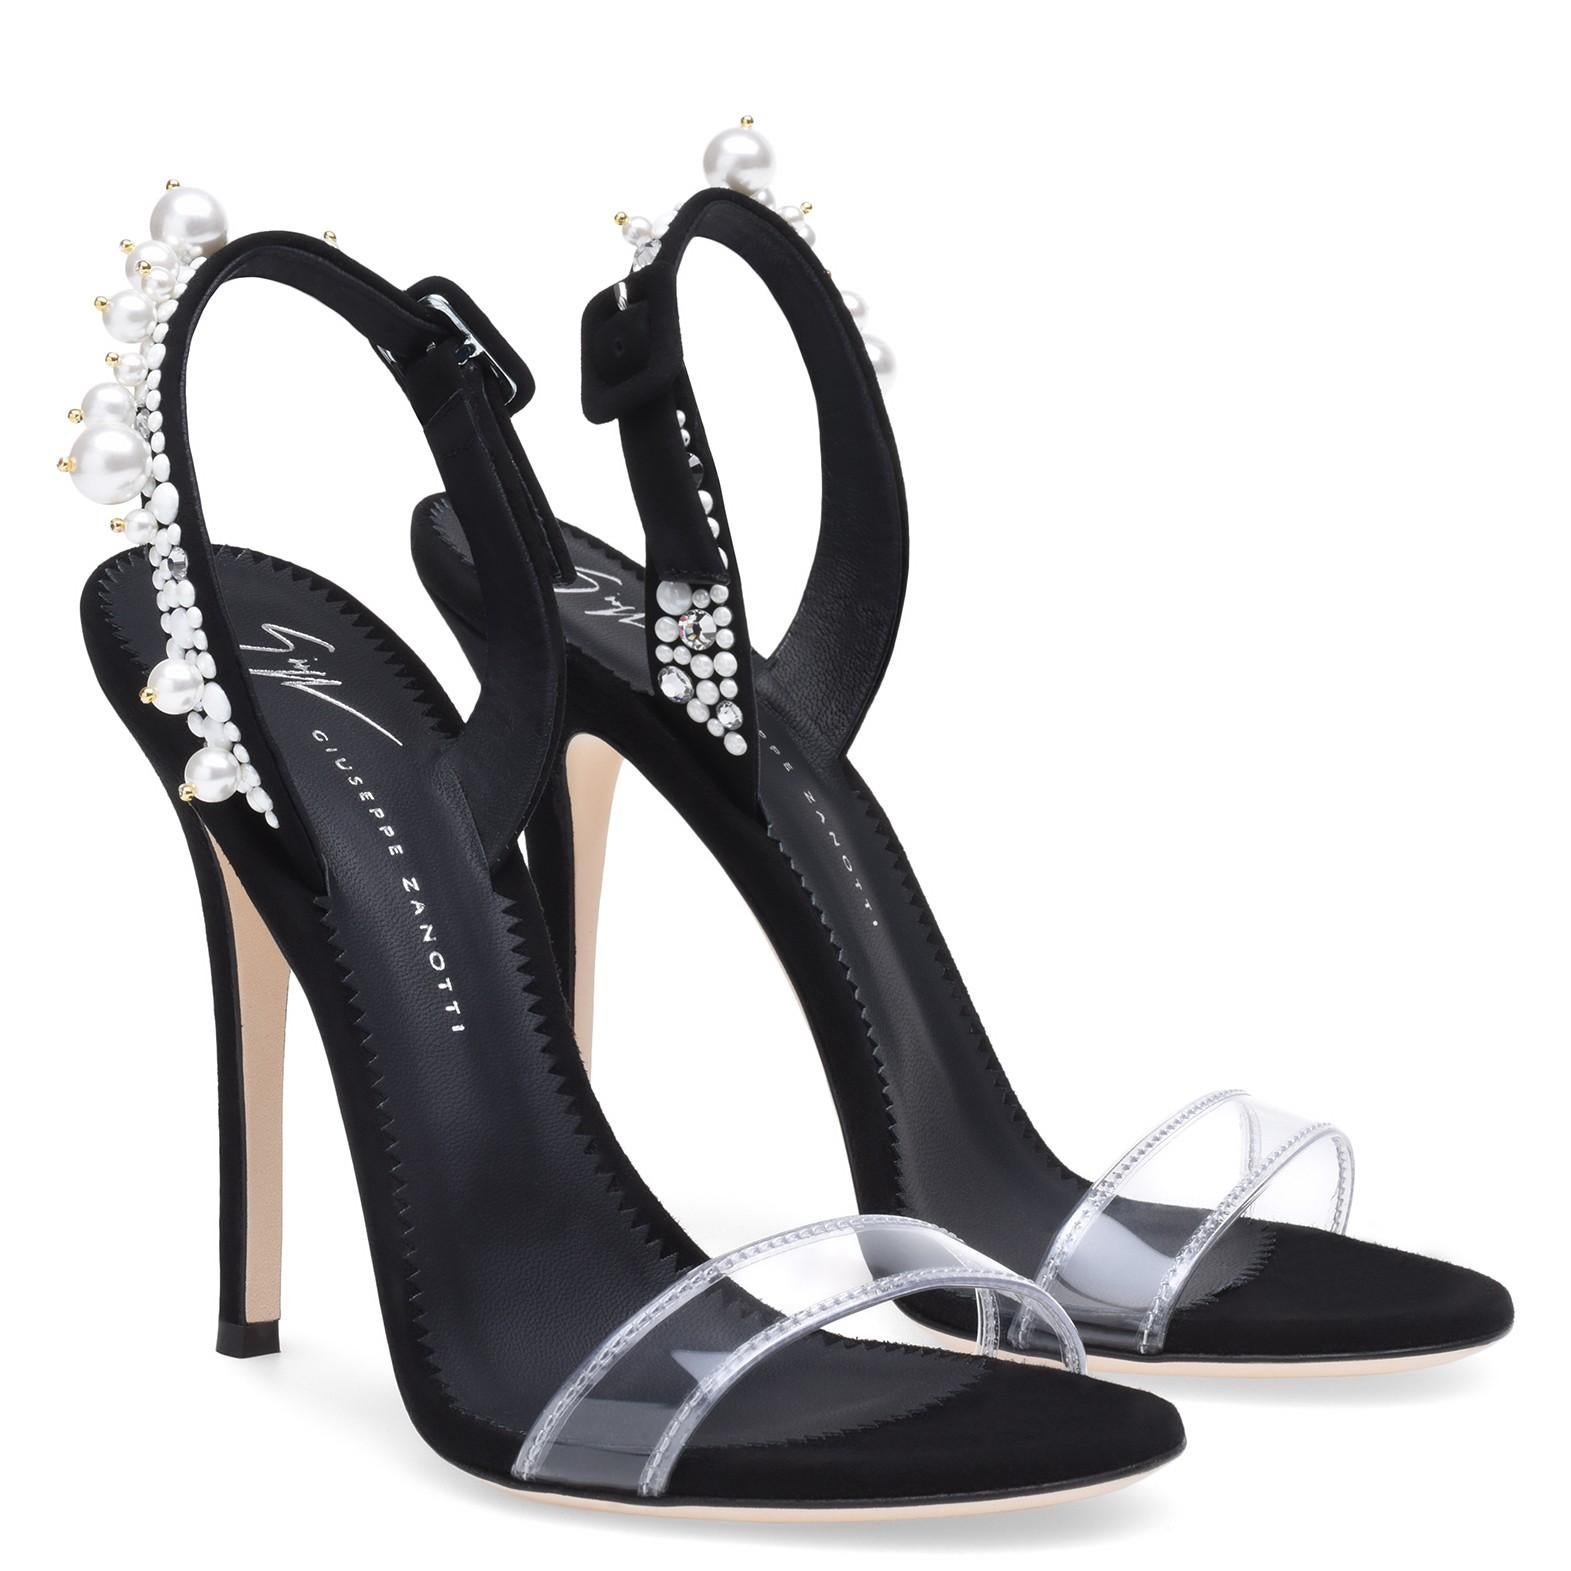 Giuseppe Zanotti NEW Black Suede PVC Pearl Crystal Evening Sandals Heels in Box

Size IT 36
Suede
PVC
Pearl
Crystal
Ankle buckle closure
Made in Italy
Heel height 4.5